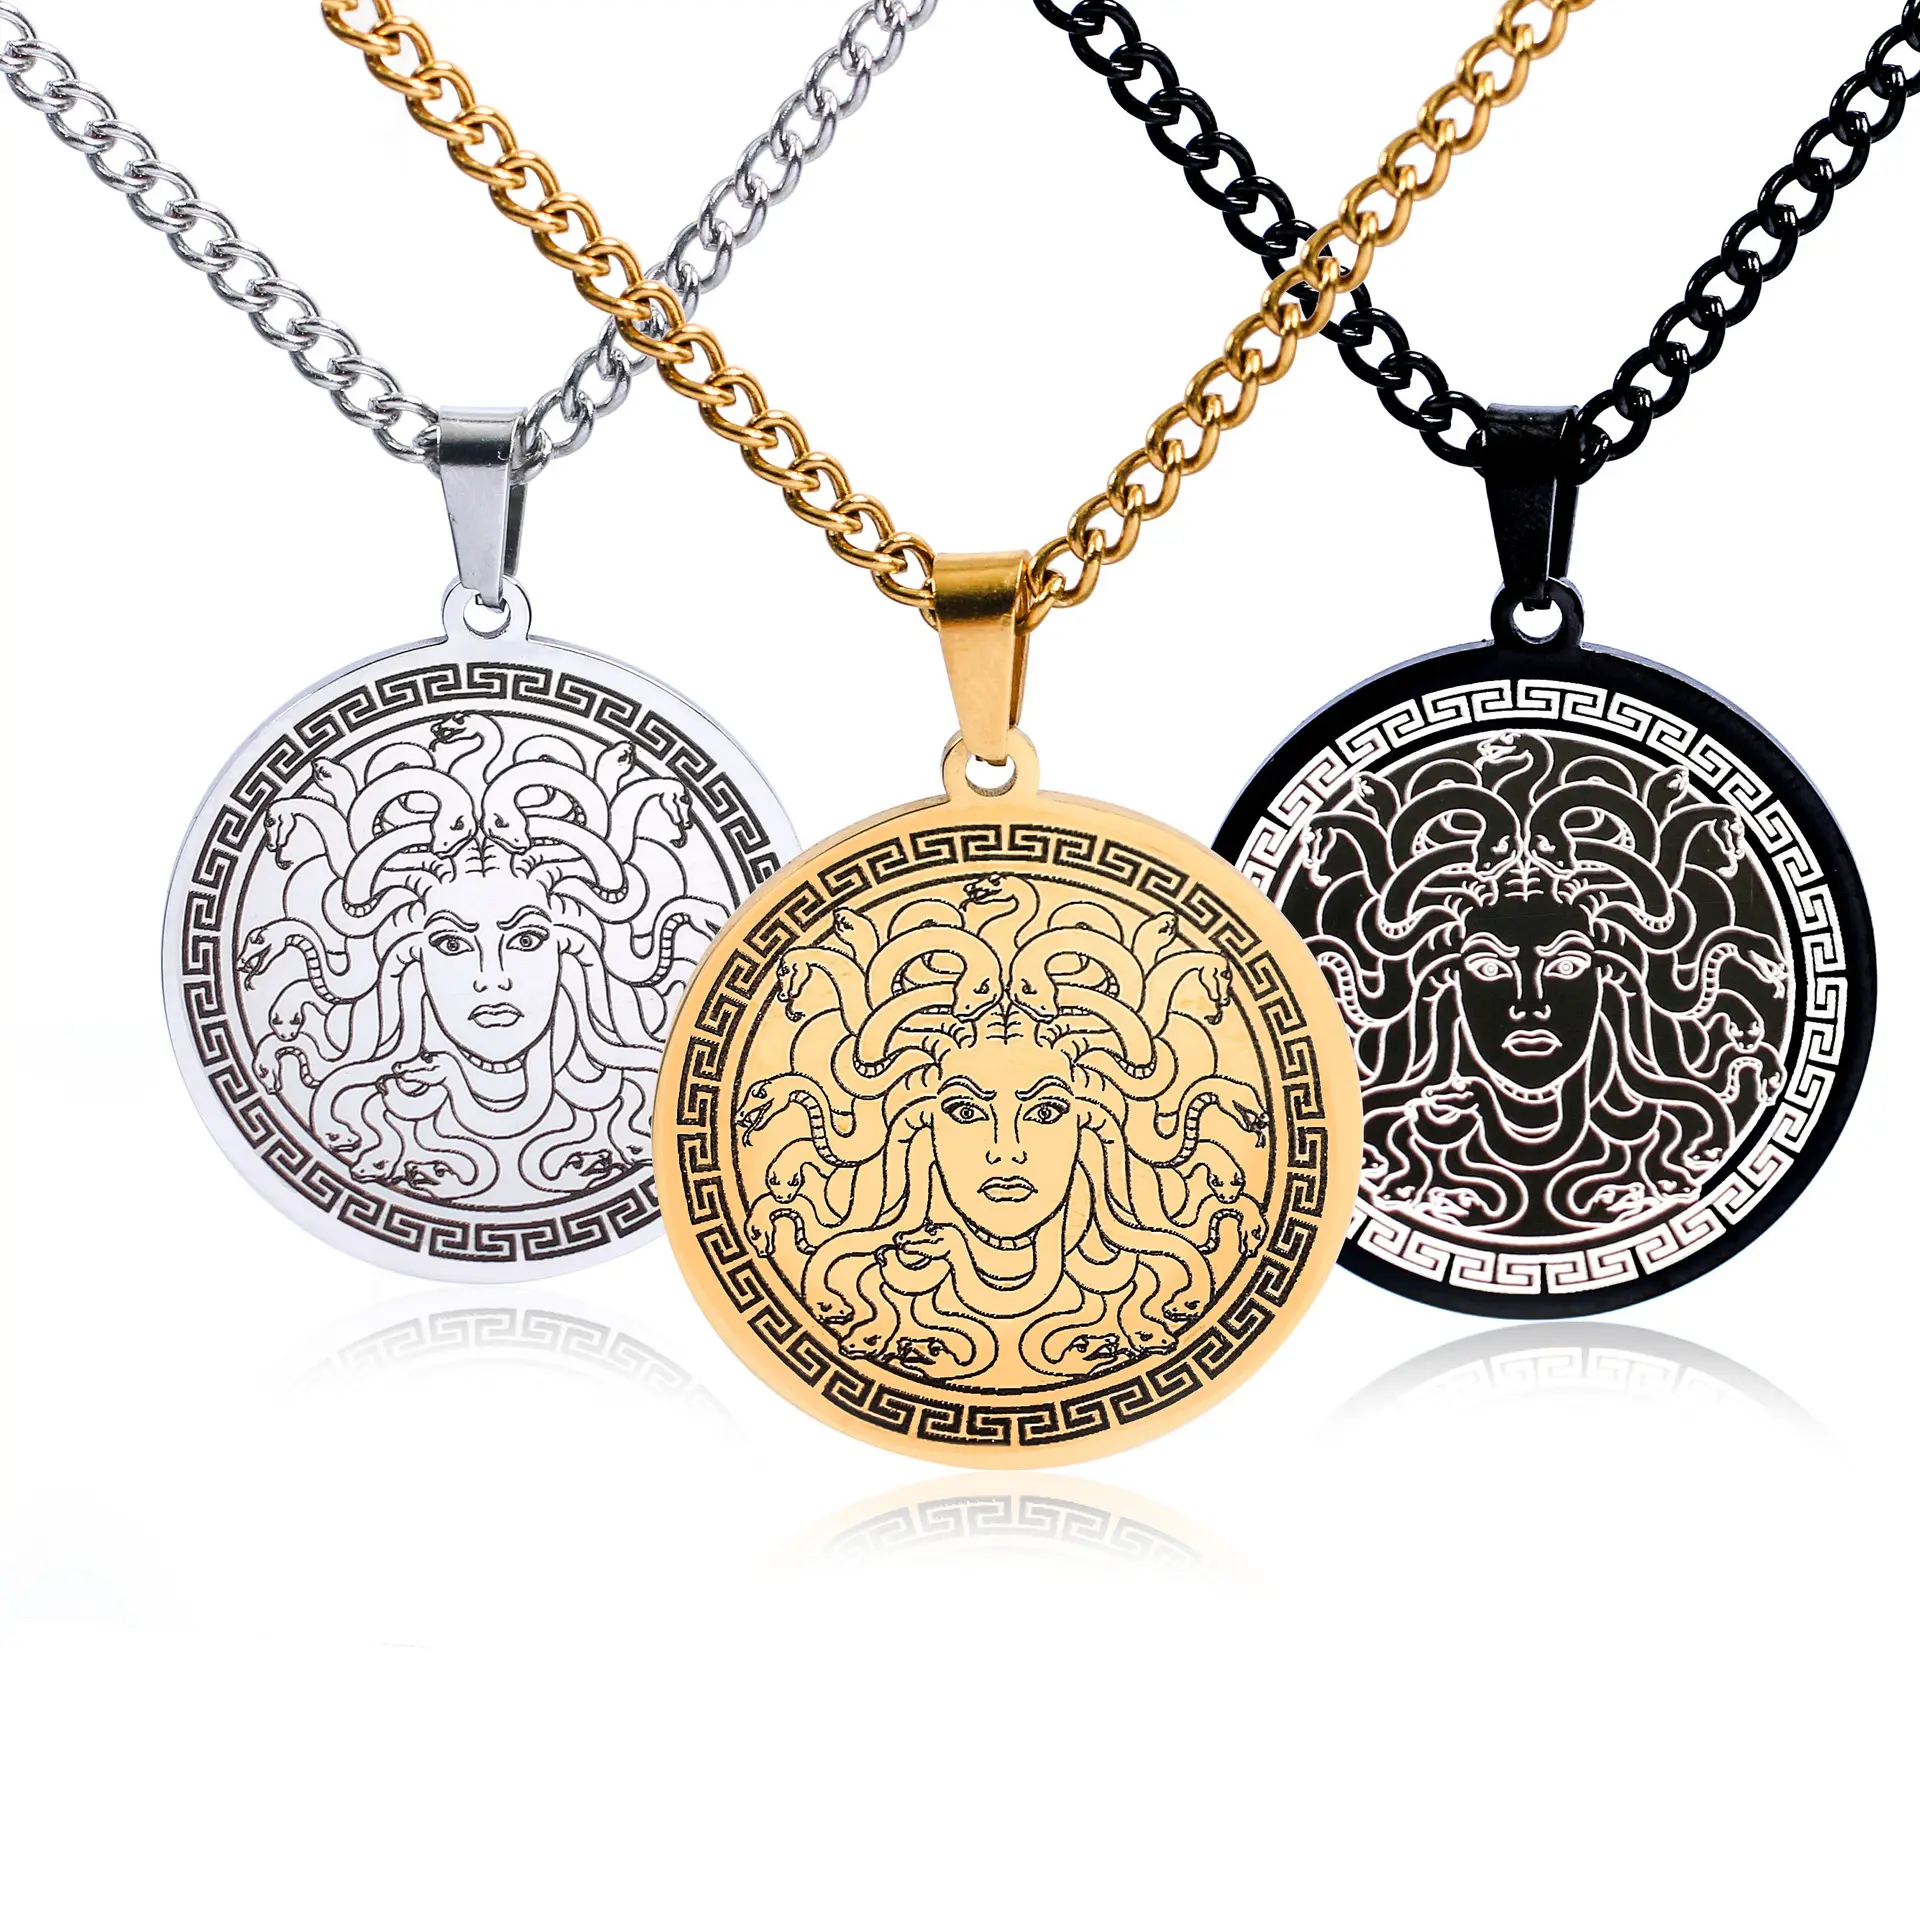 Wholesale Jewelry Stainless Steel Medusa Pendant Necklace Punk Hip Hop Coin Gold Plated Men Necklace